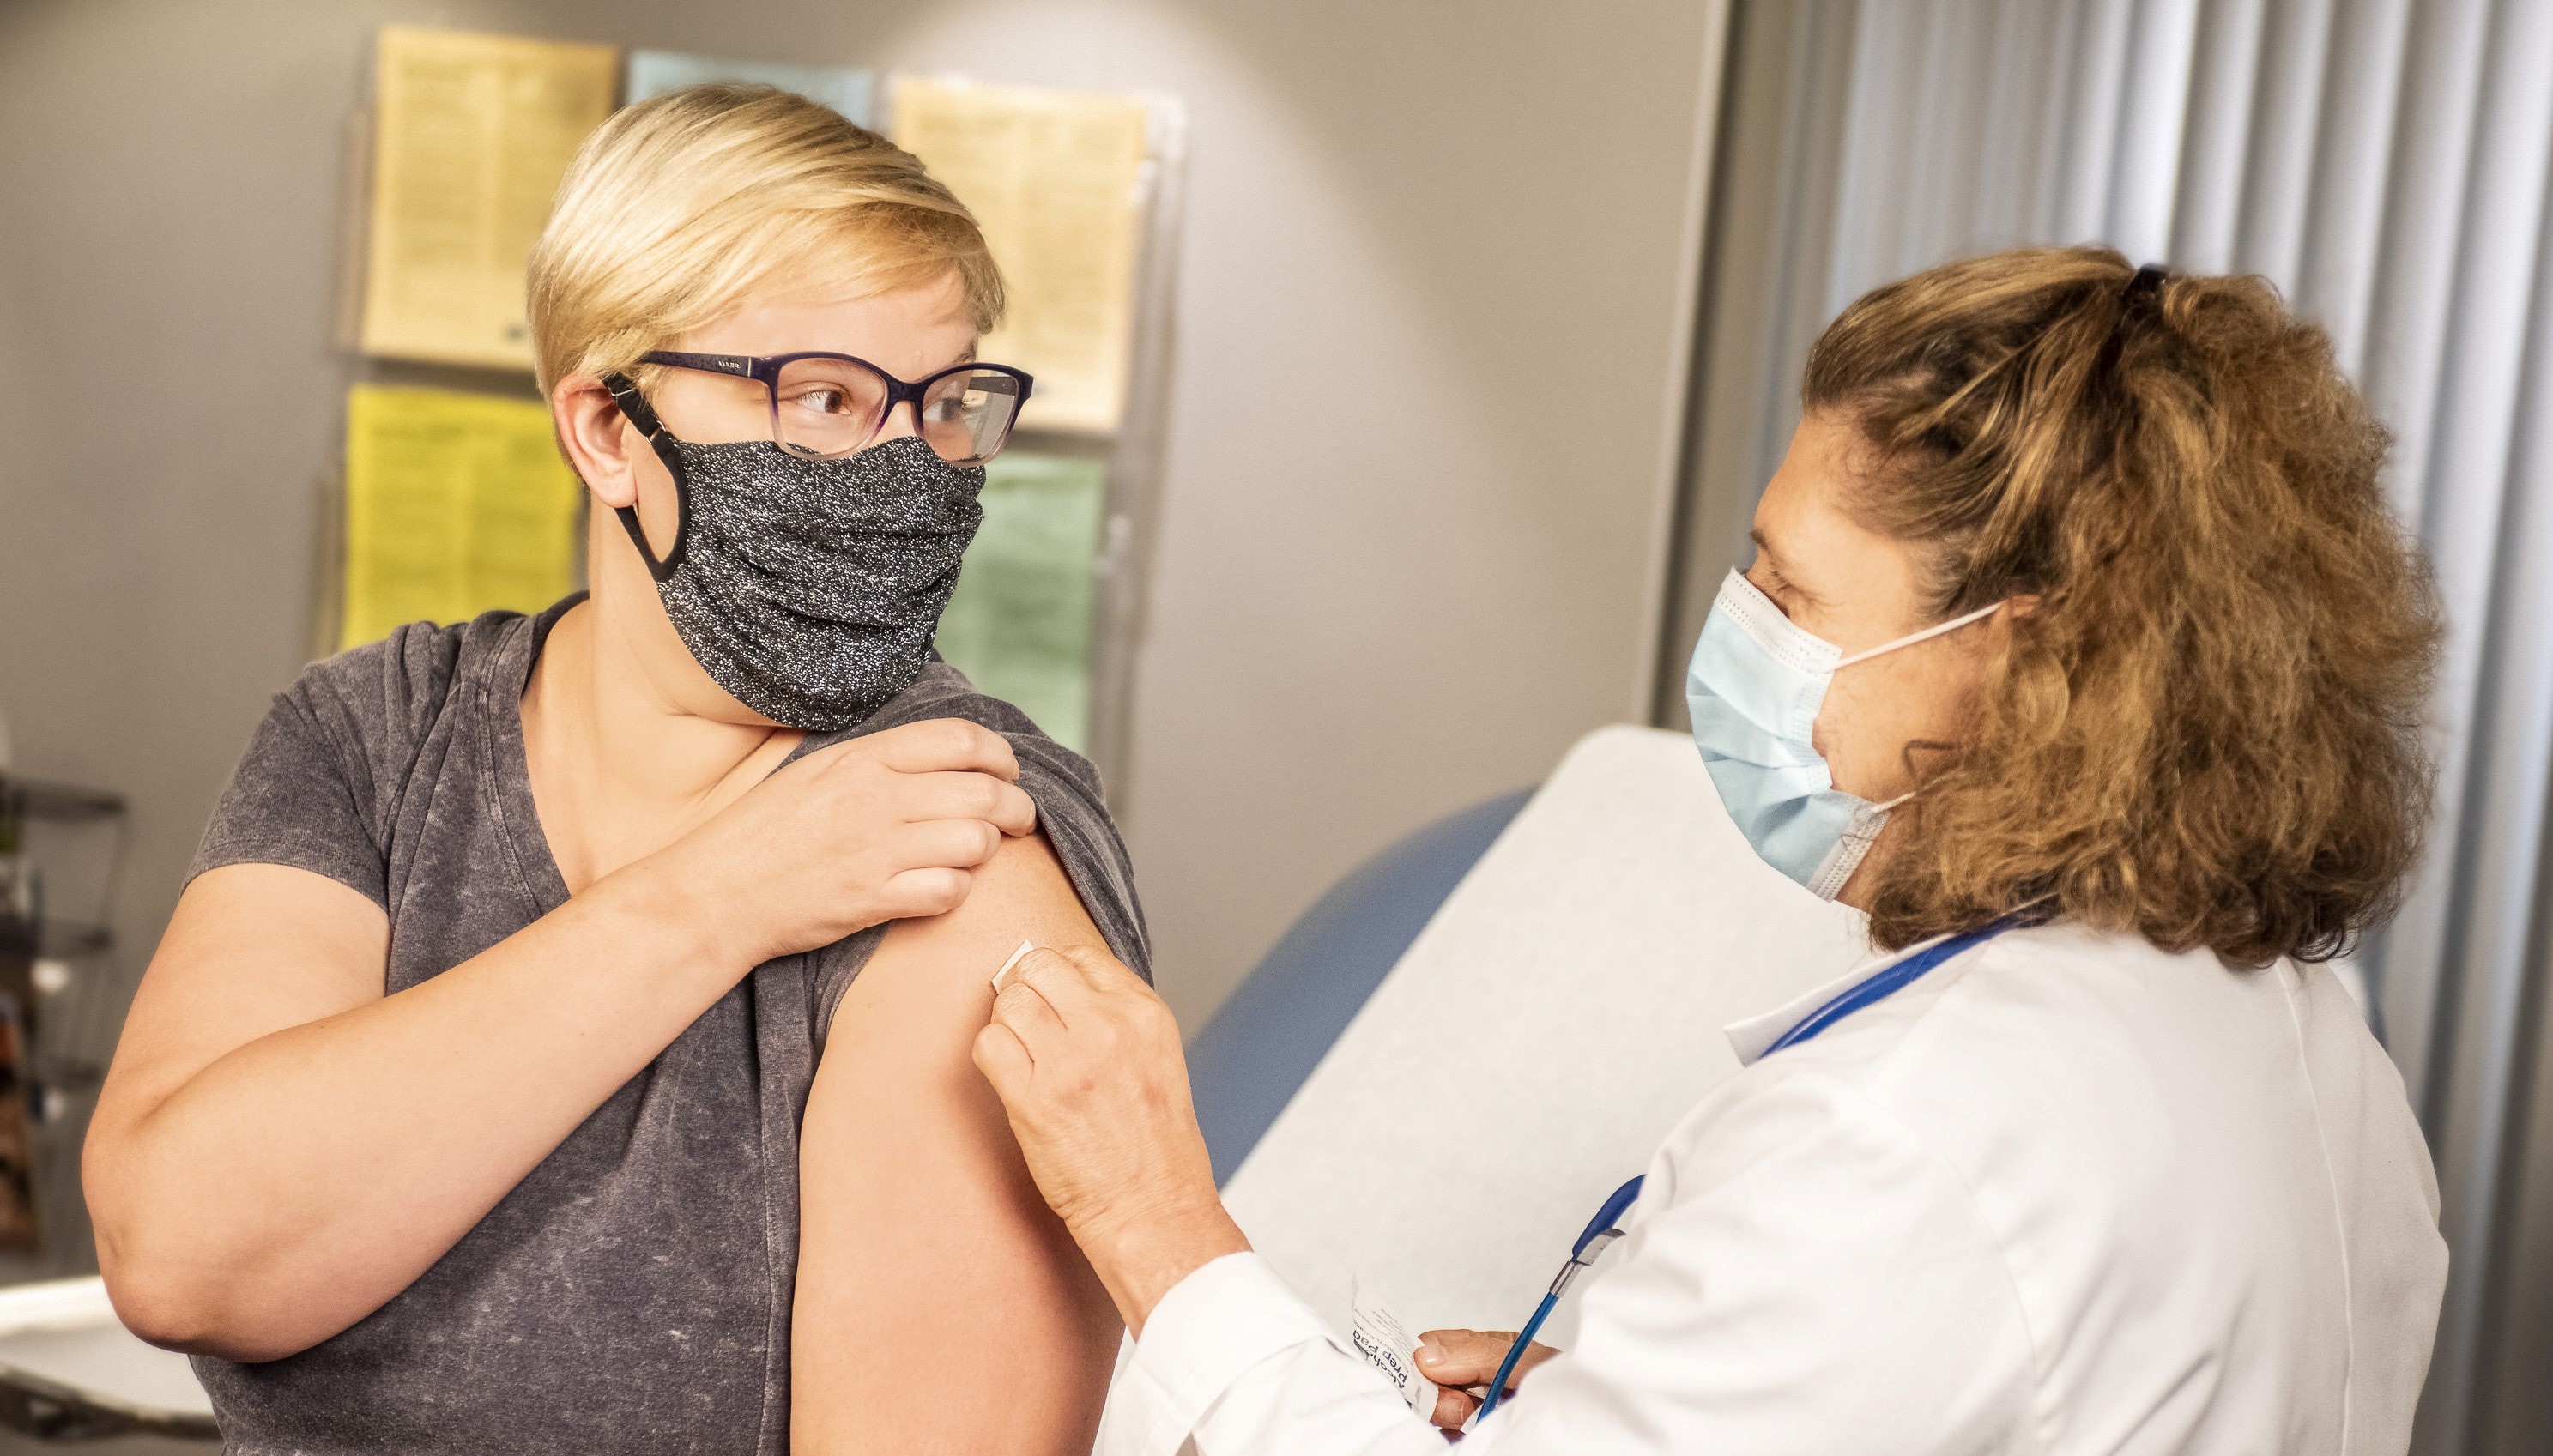 Woman touching band aid on arm after vaccination